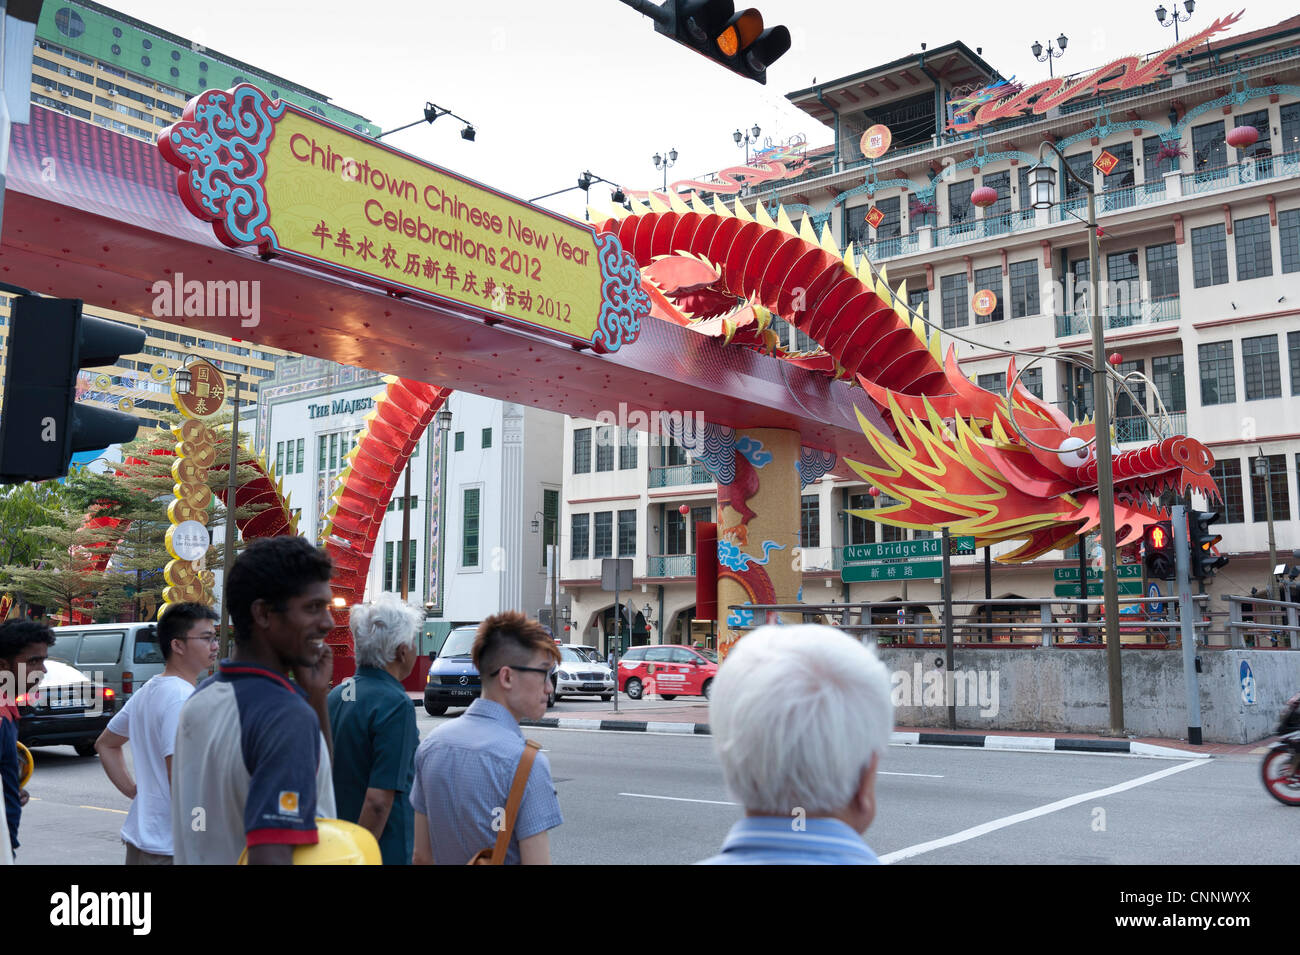 chinatown-year-of-the-dragon-chinese-new-year-celebrations-2012-signs-CNNWYX.jpg